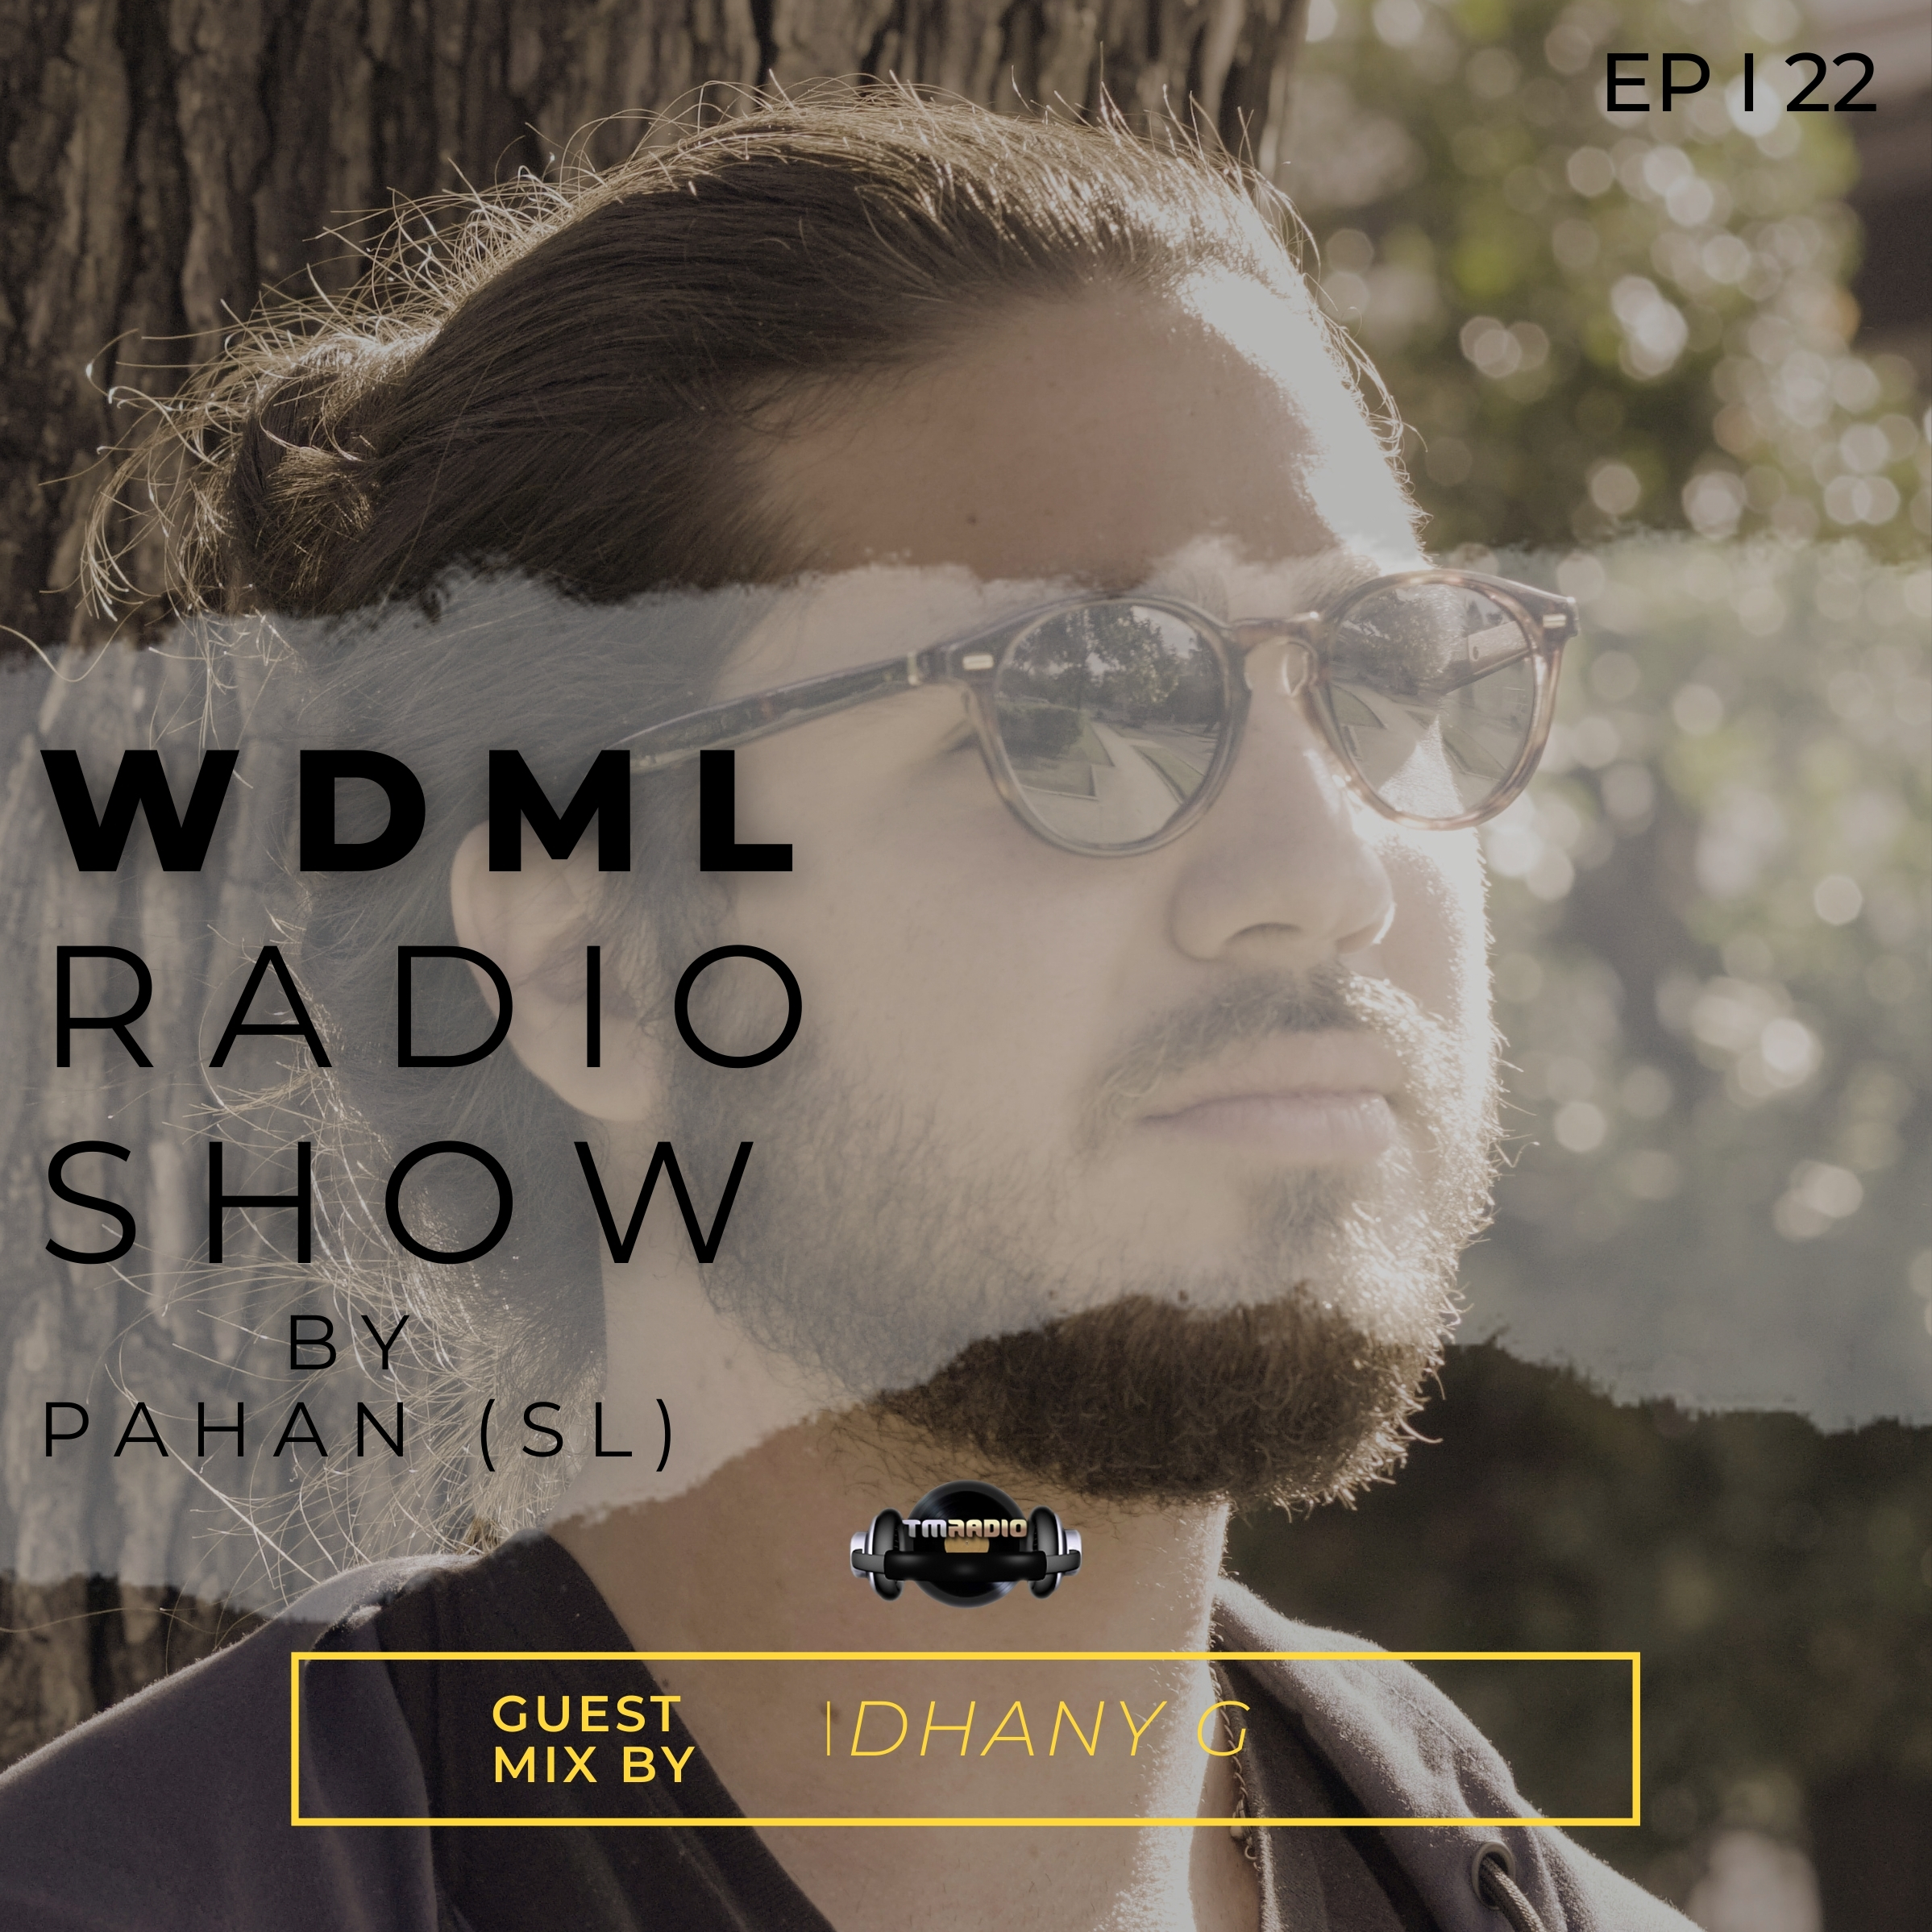 Walking Down Memory Lane |22| Guest mix by Dhany G | 28.12.2020 | TM Radio USA (from December 28th, 2020)